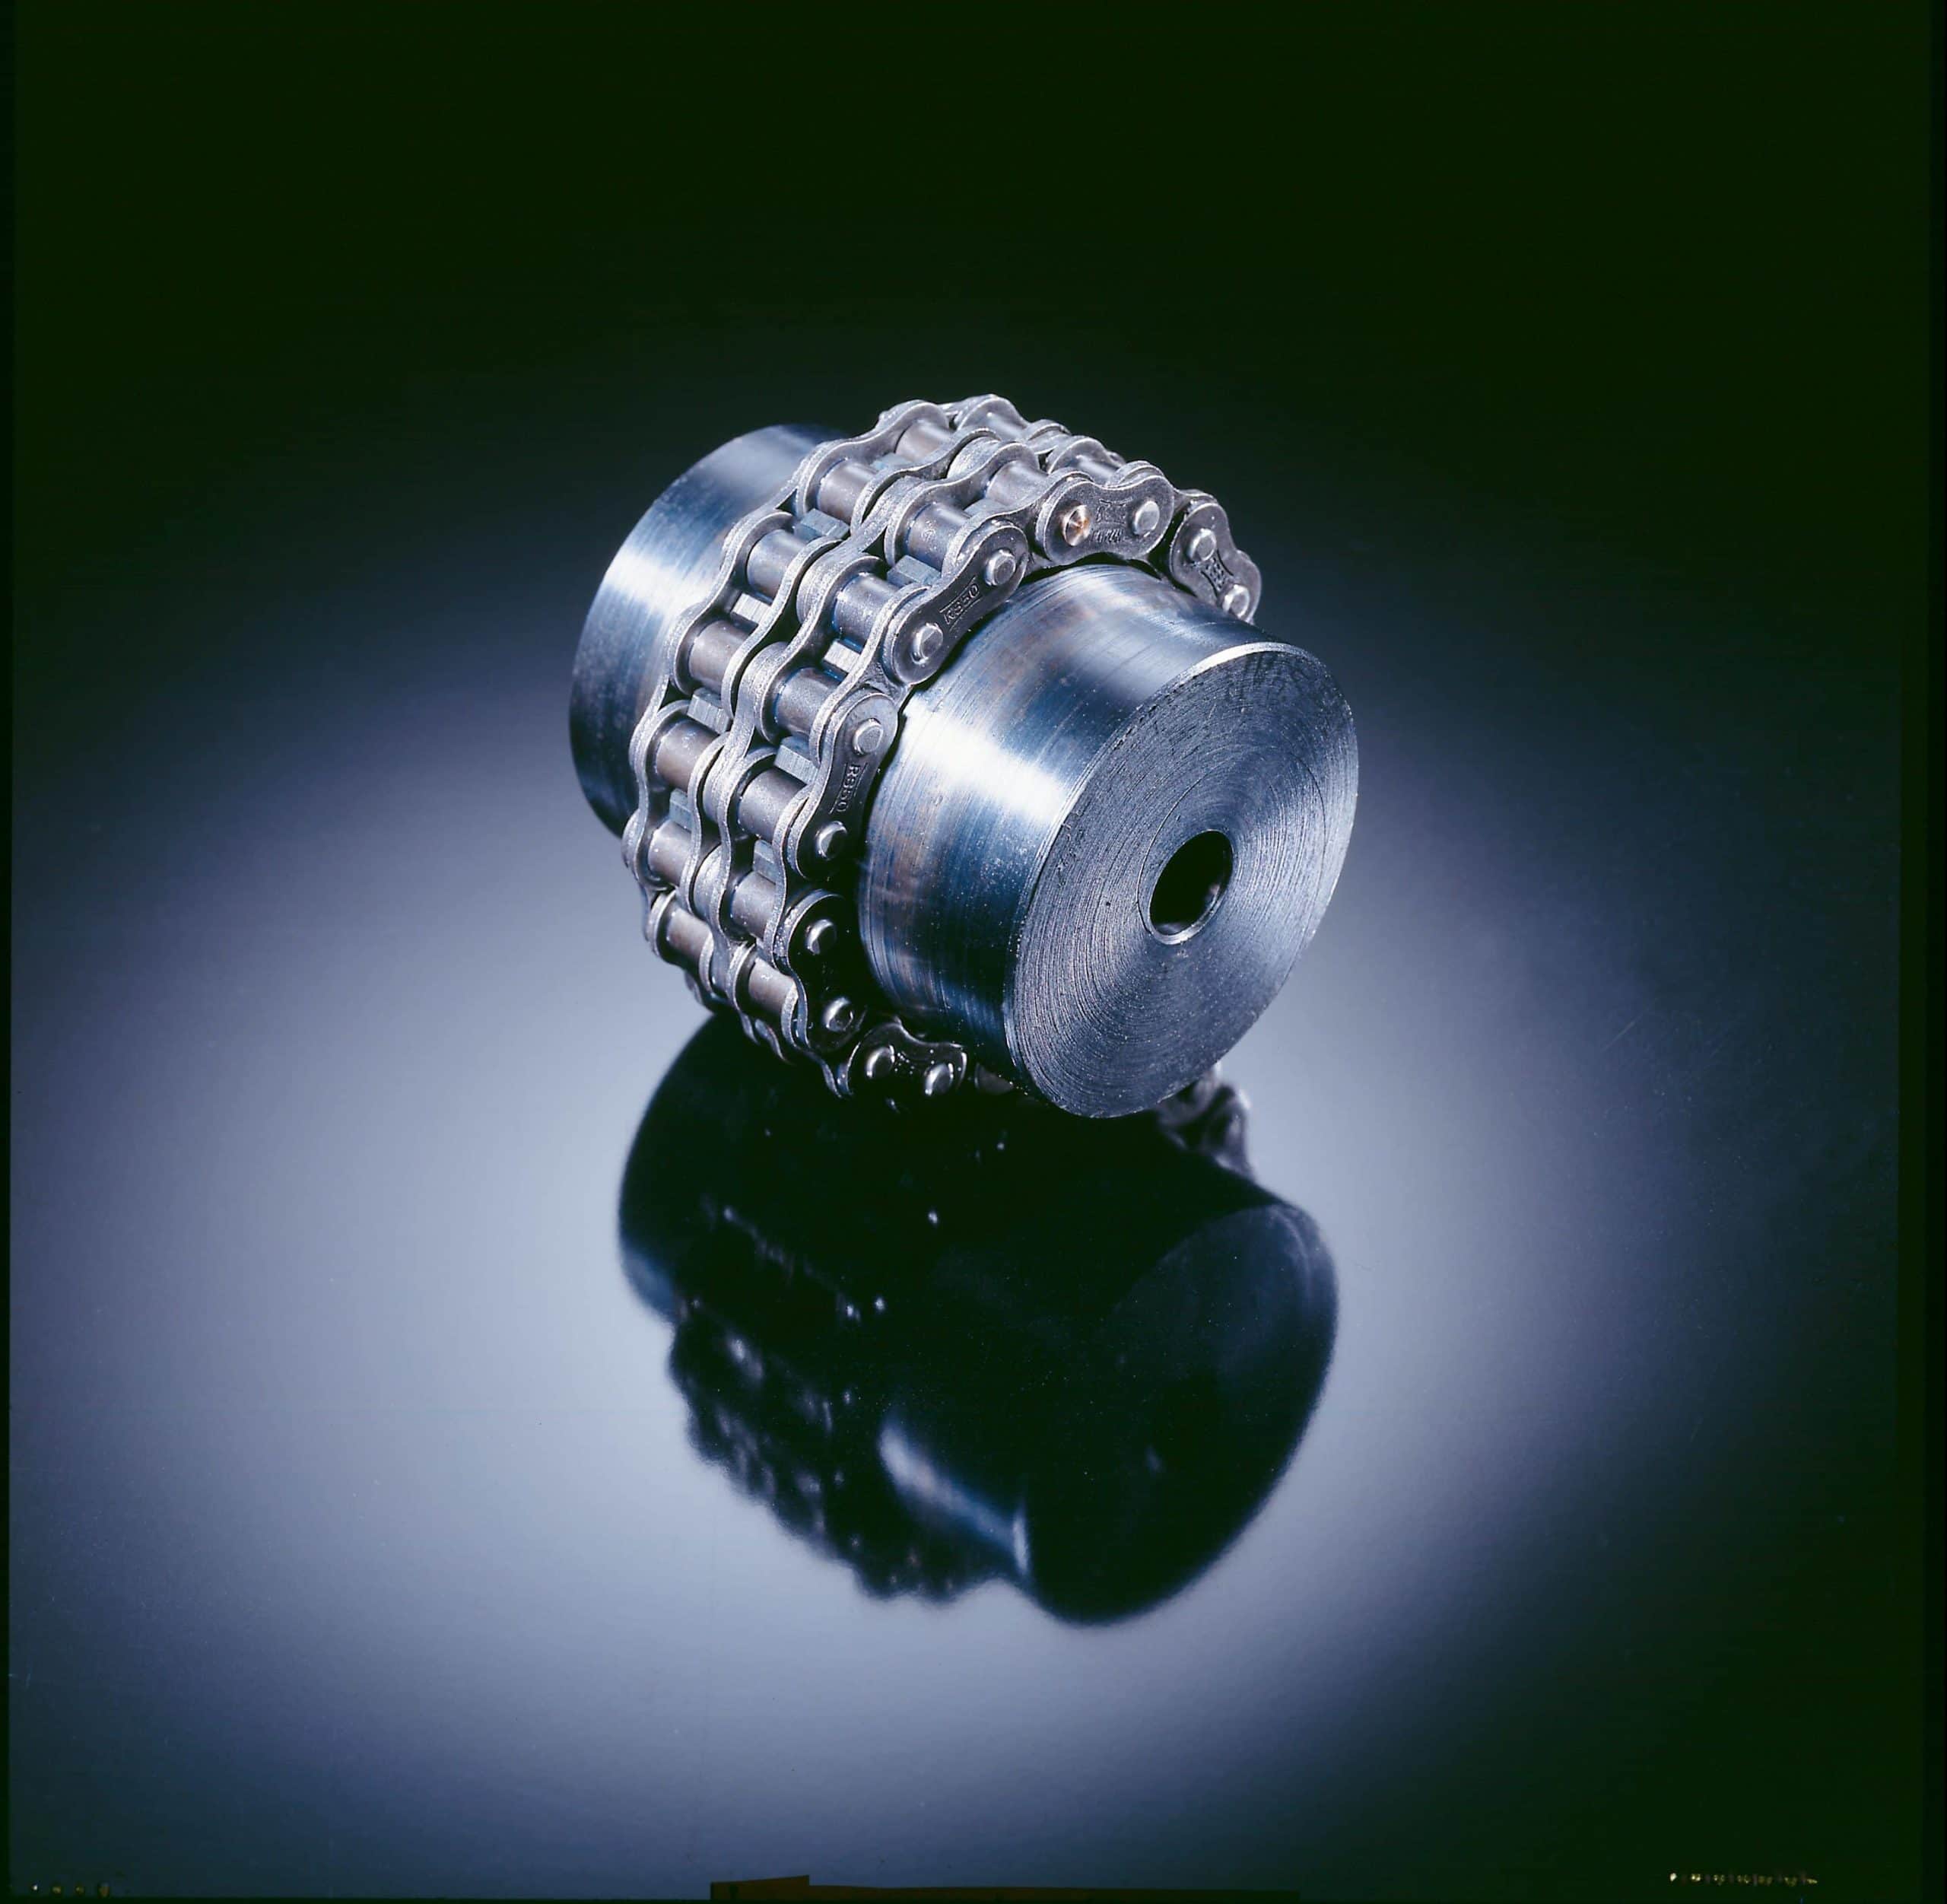 Roller Chain Couplings Ensure Stronger, More Durable Connections